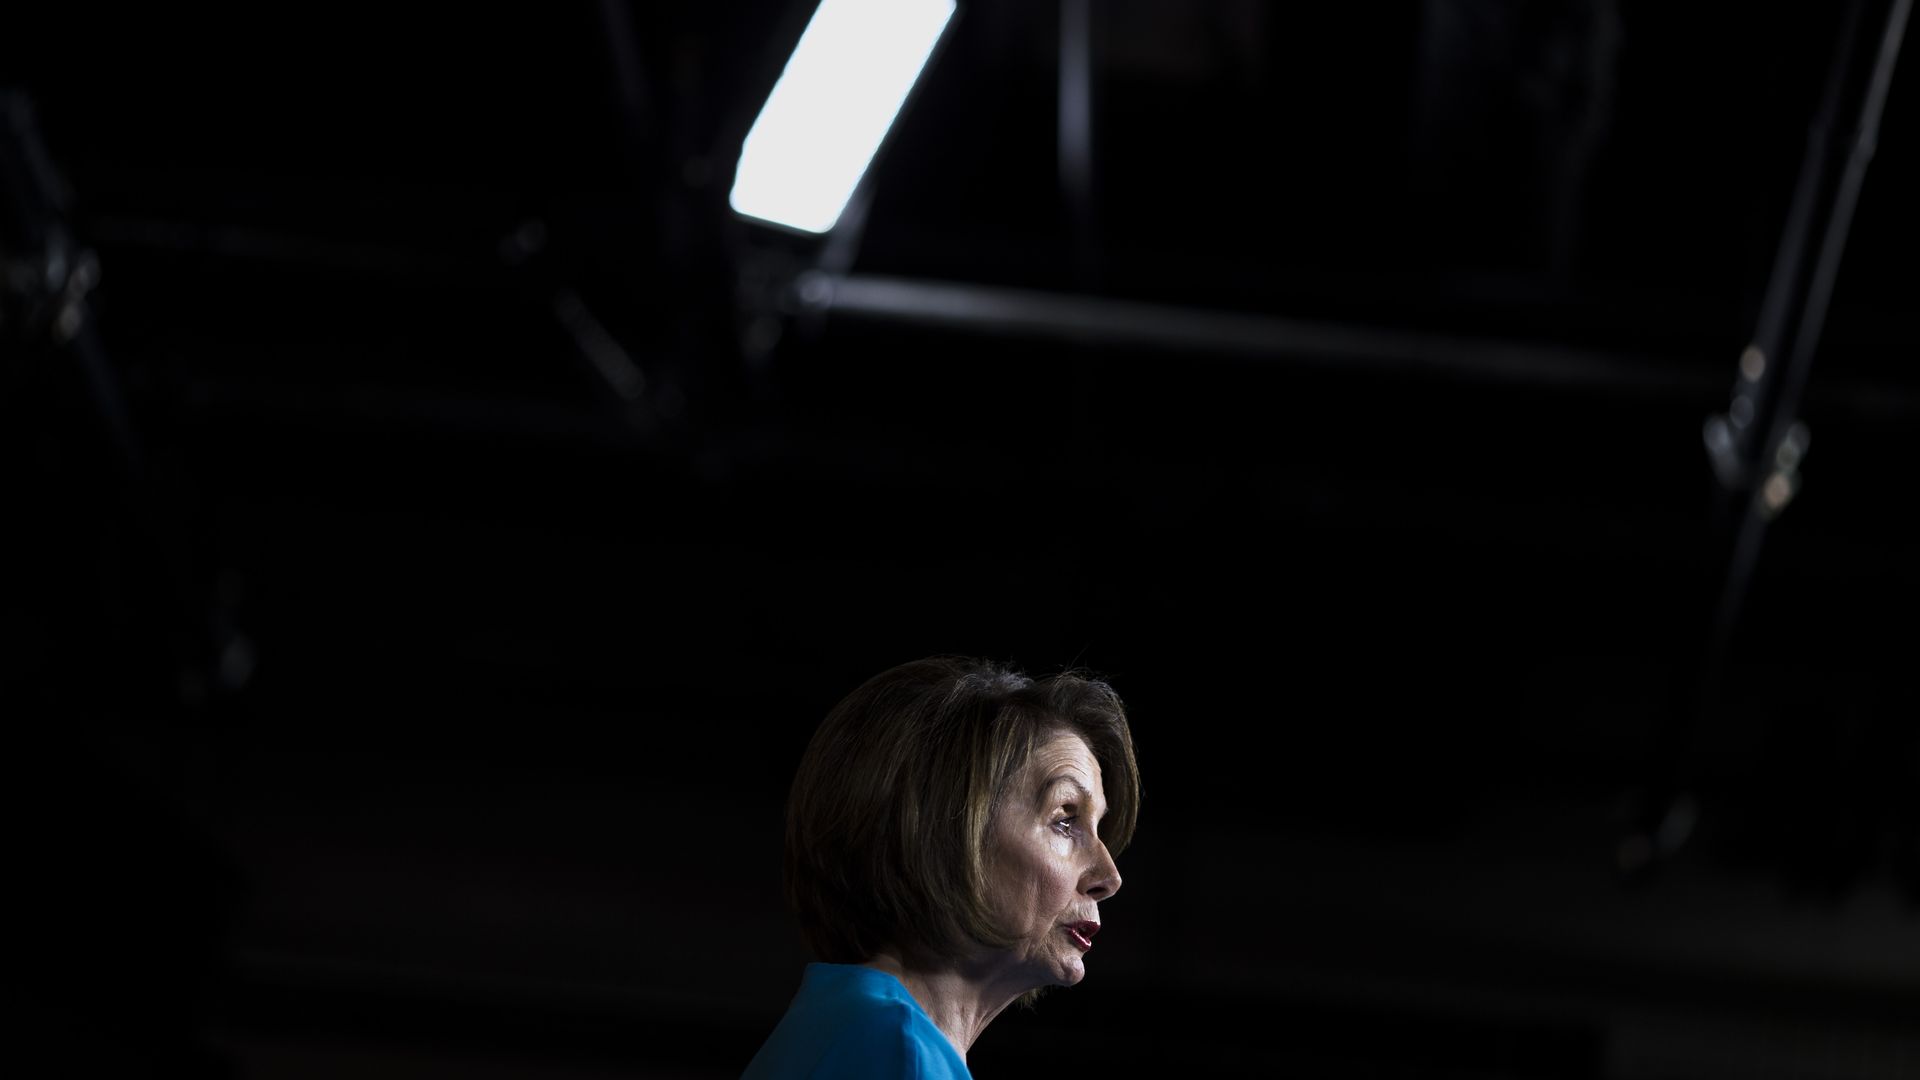 In this image, Nancy Pelosi stands and speaks under a spotlight at a press conference.